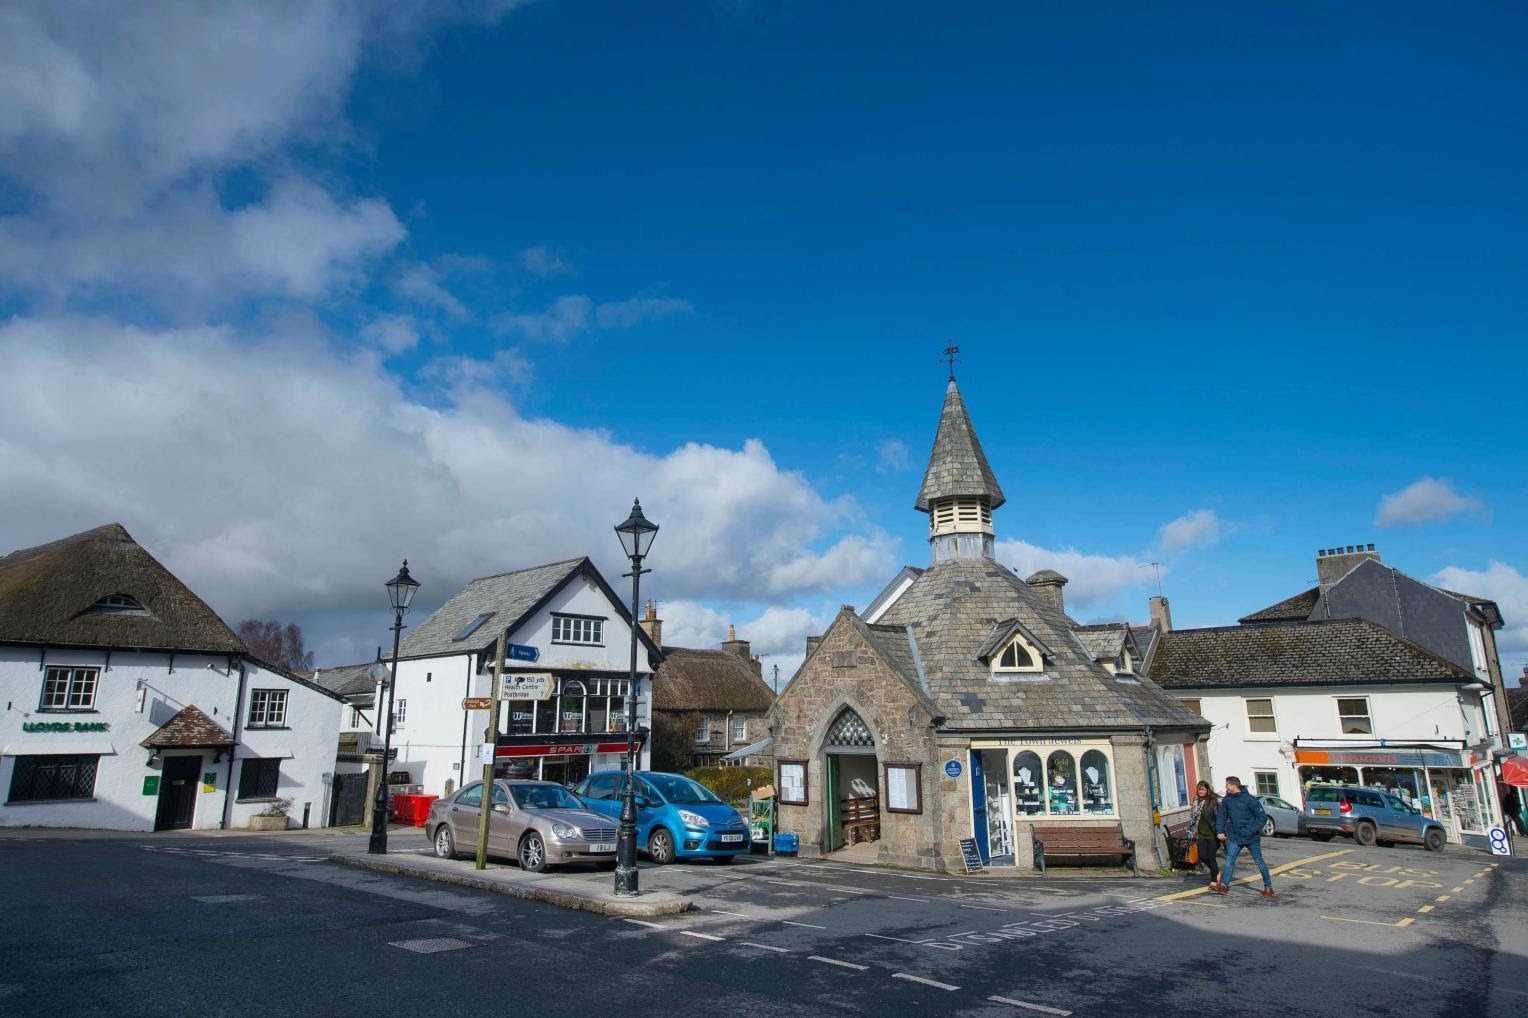 Chagford has been home to a market since the 13th century